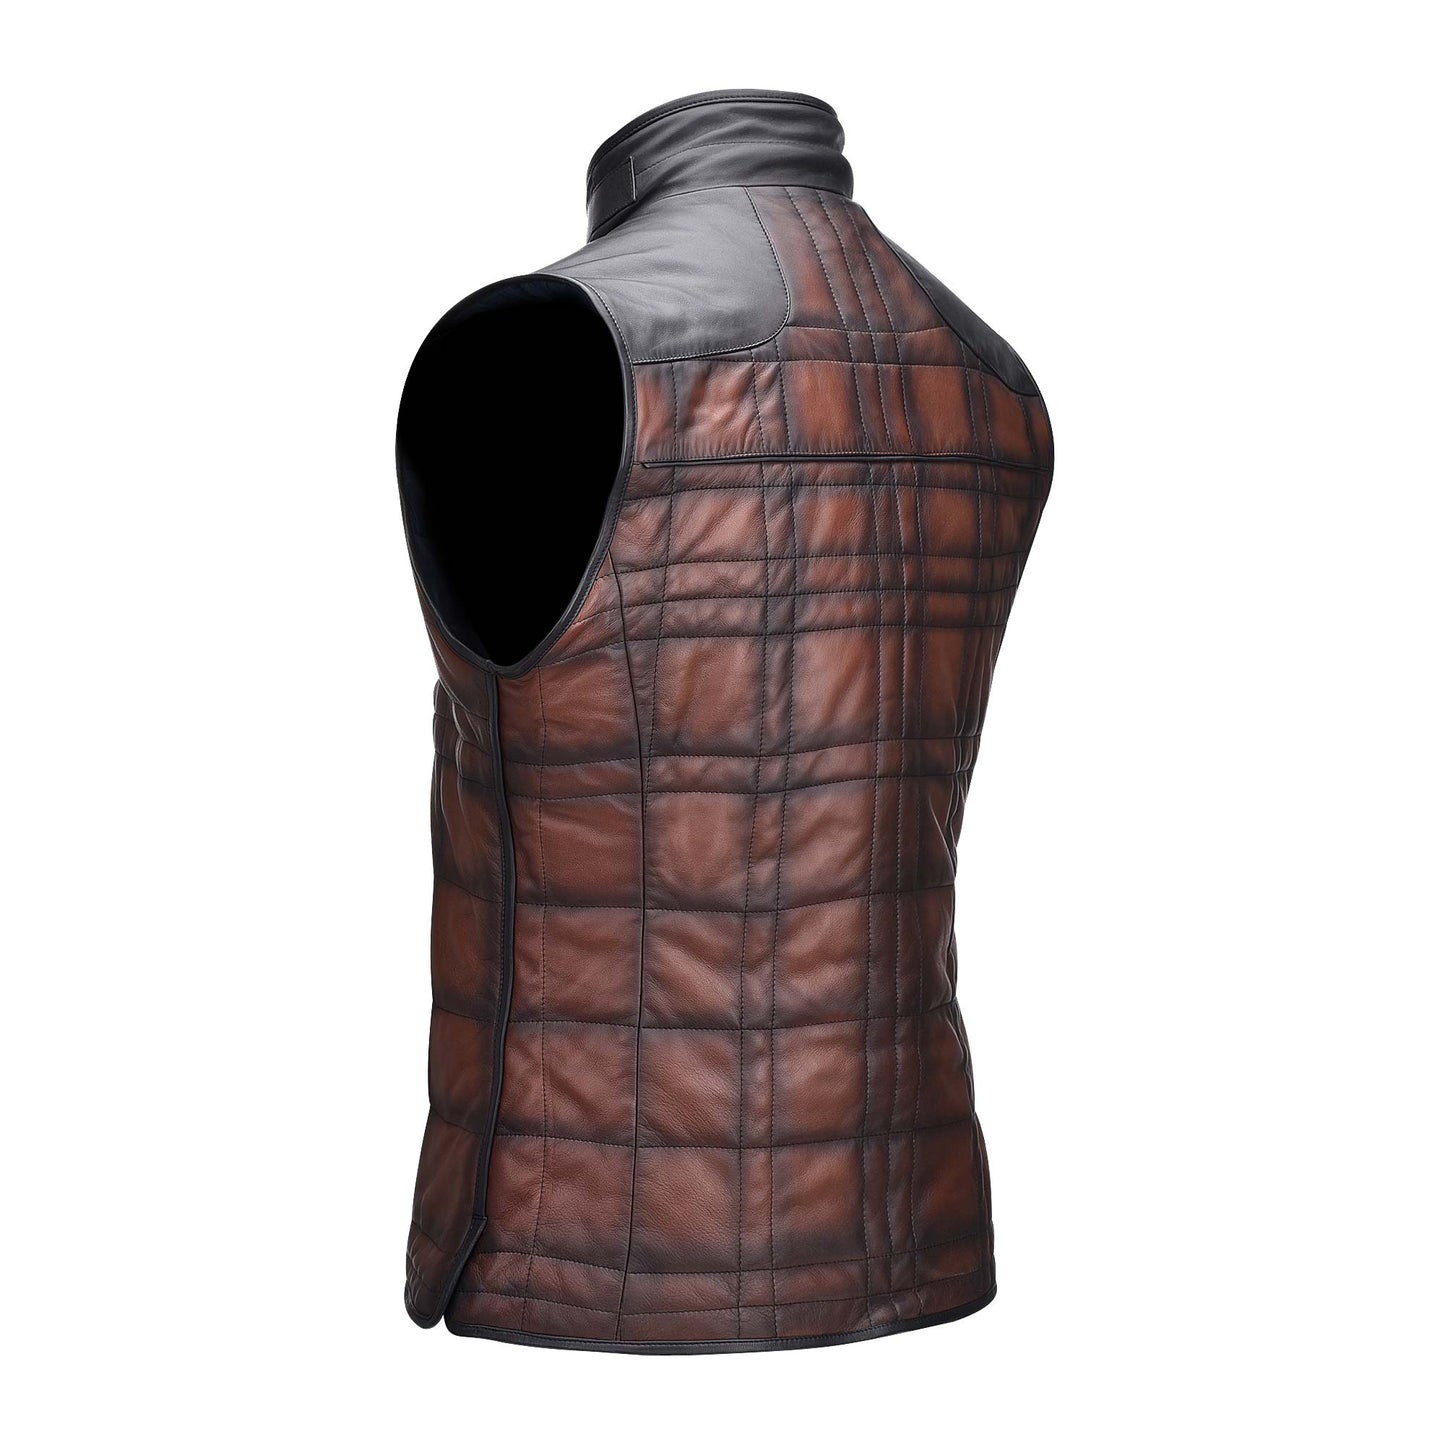 Embroidered brown leather reversible vest